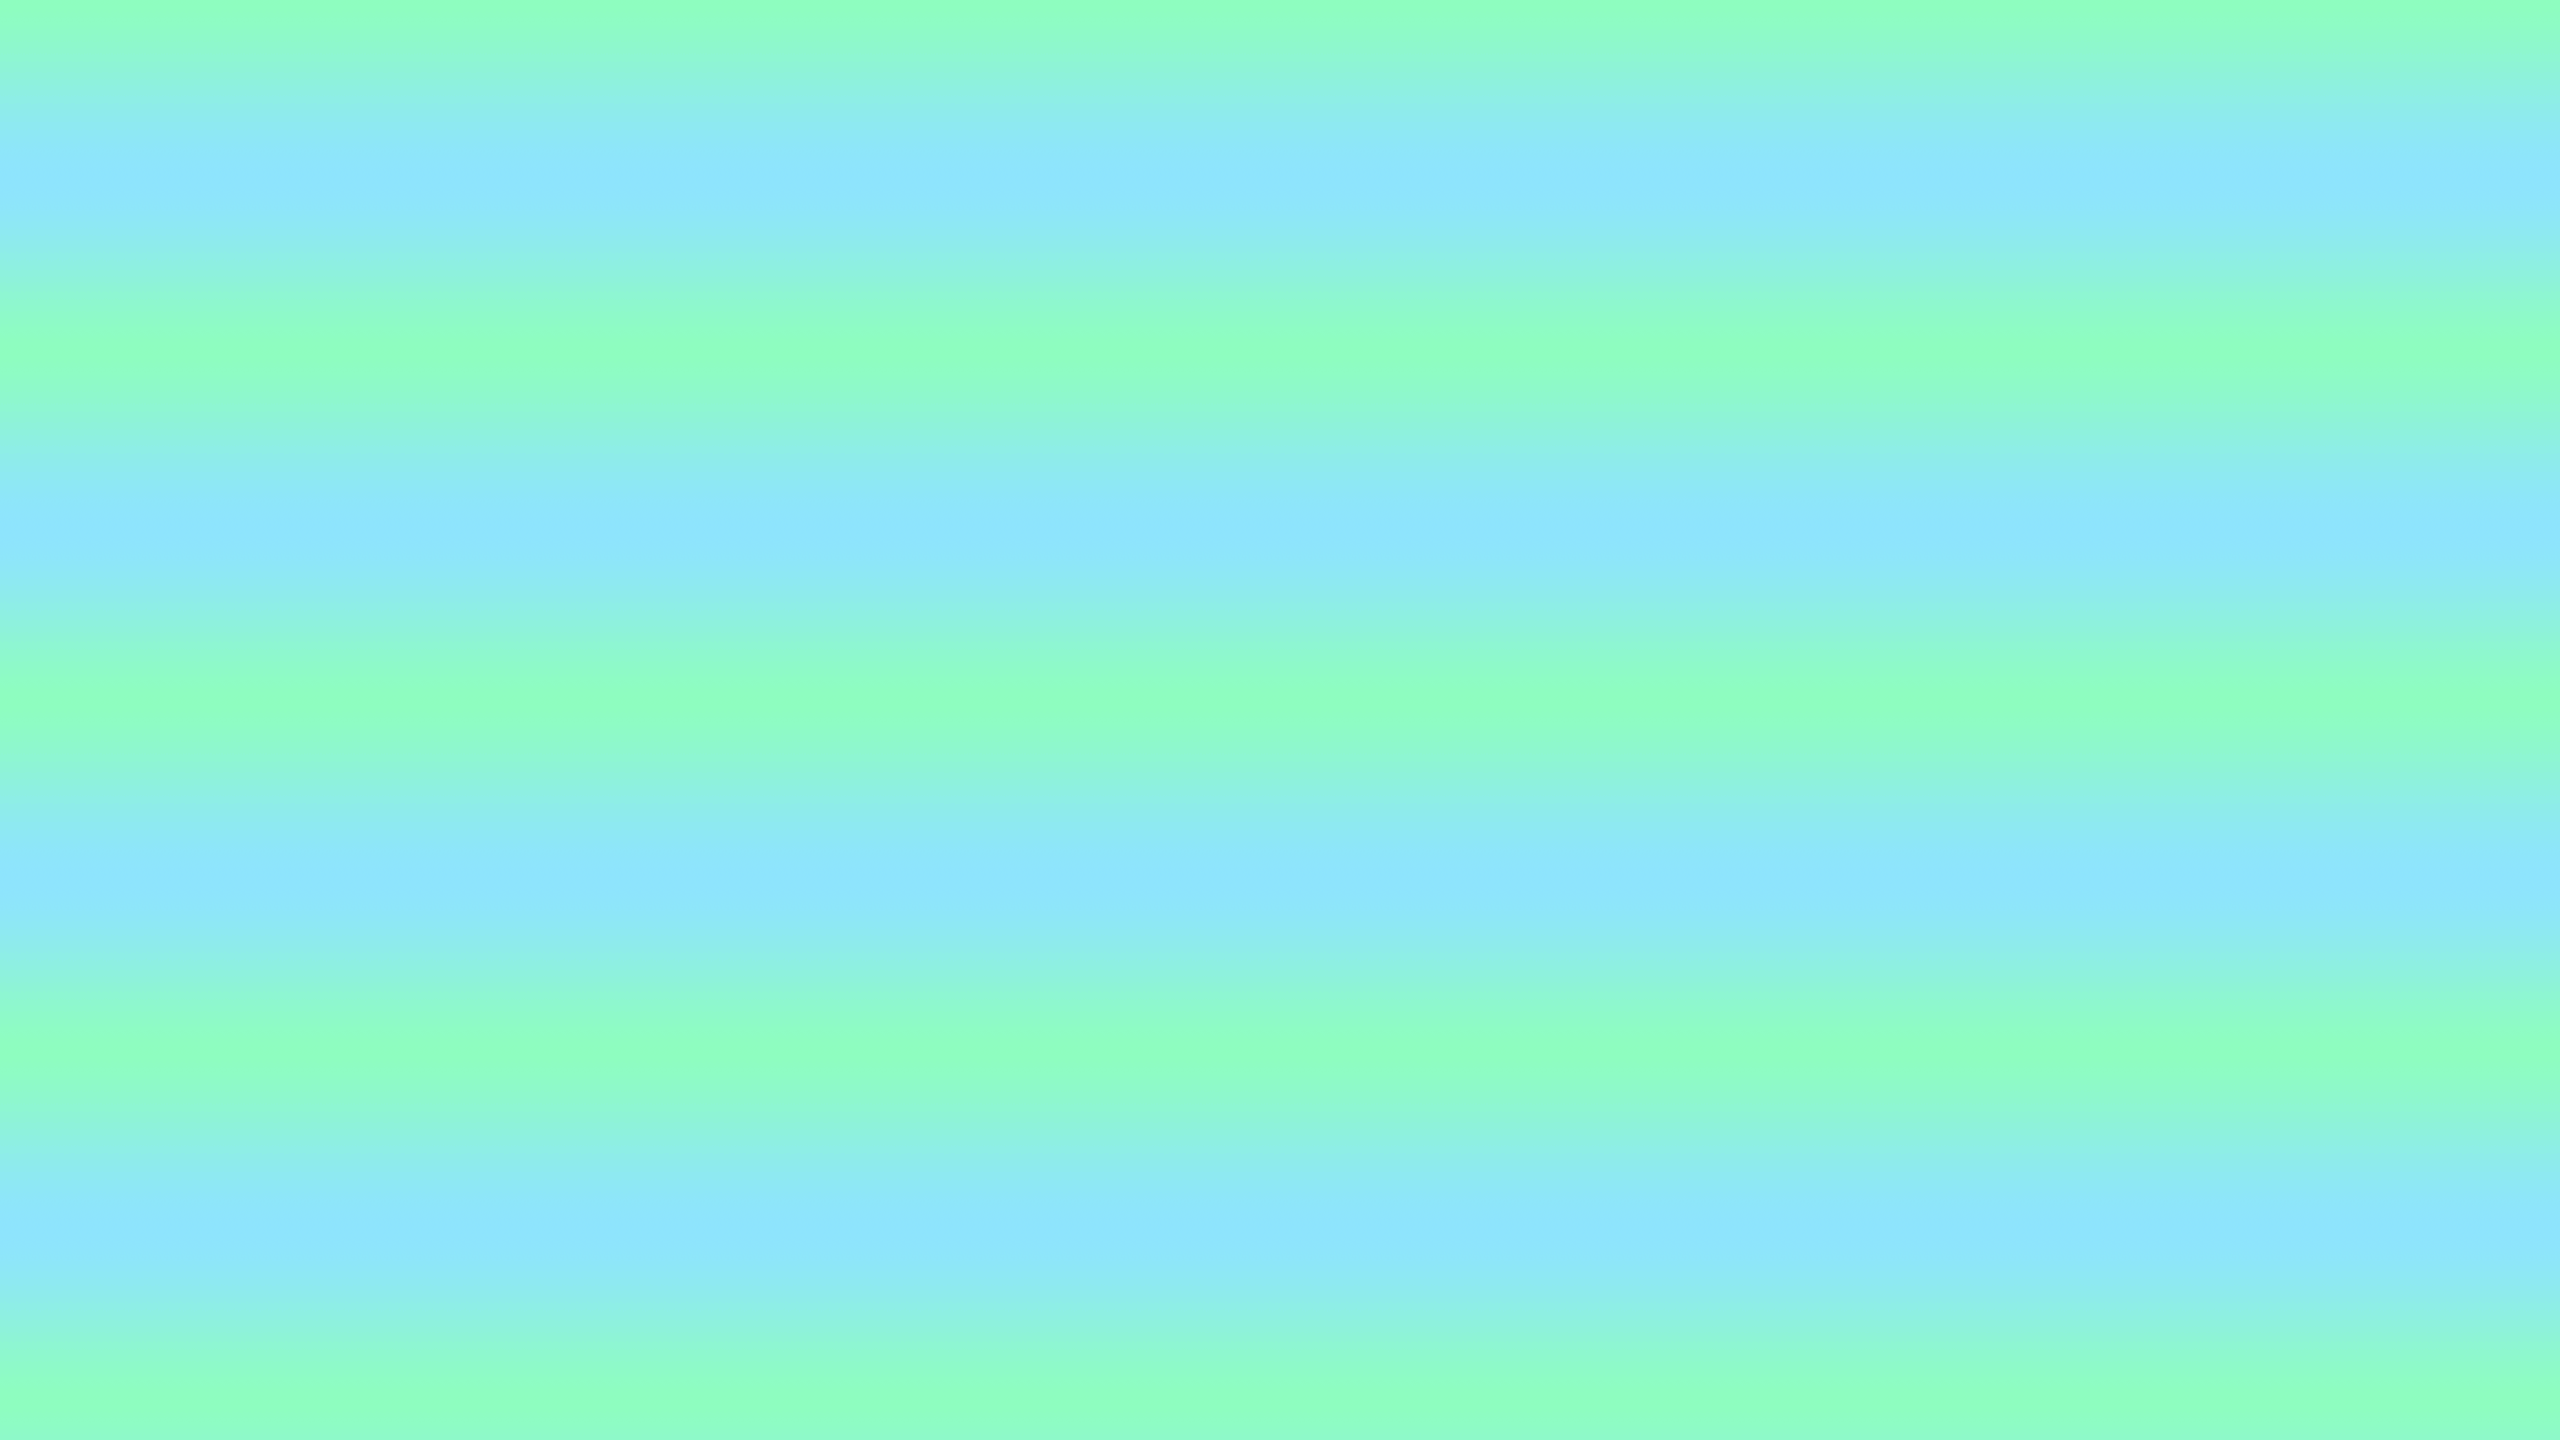 Pastel Blue Green Desktop Wallpaper Is Easy Just Save The